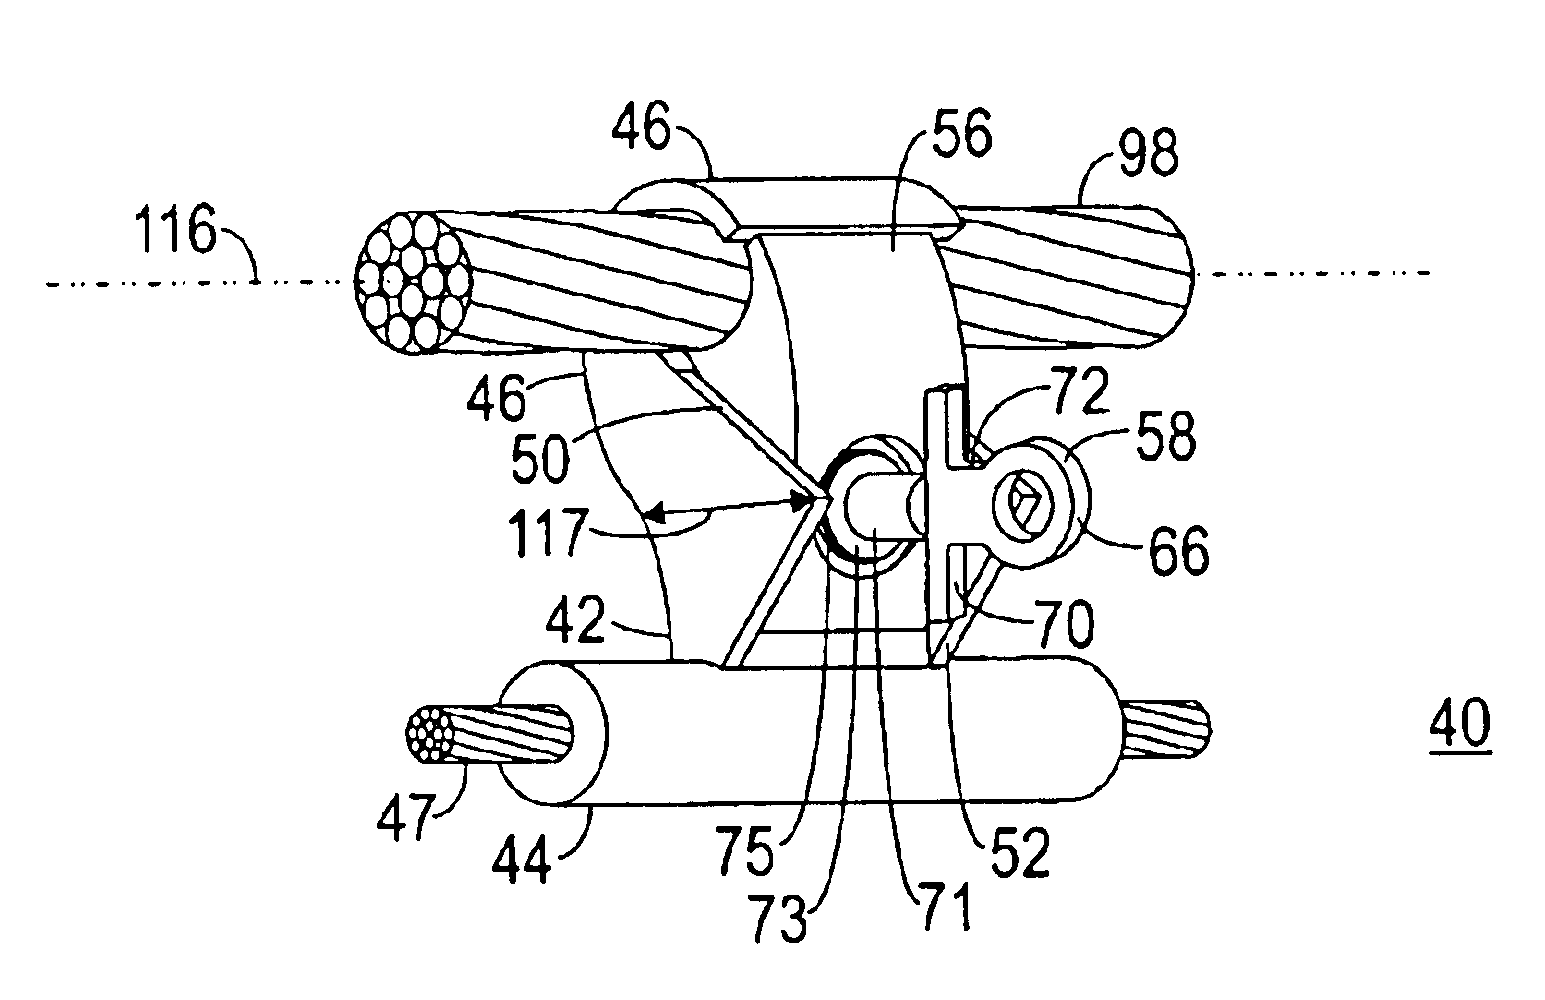 Clamp for a vibration damper and method of installing same